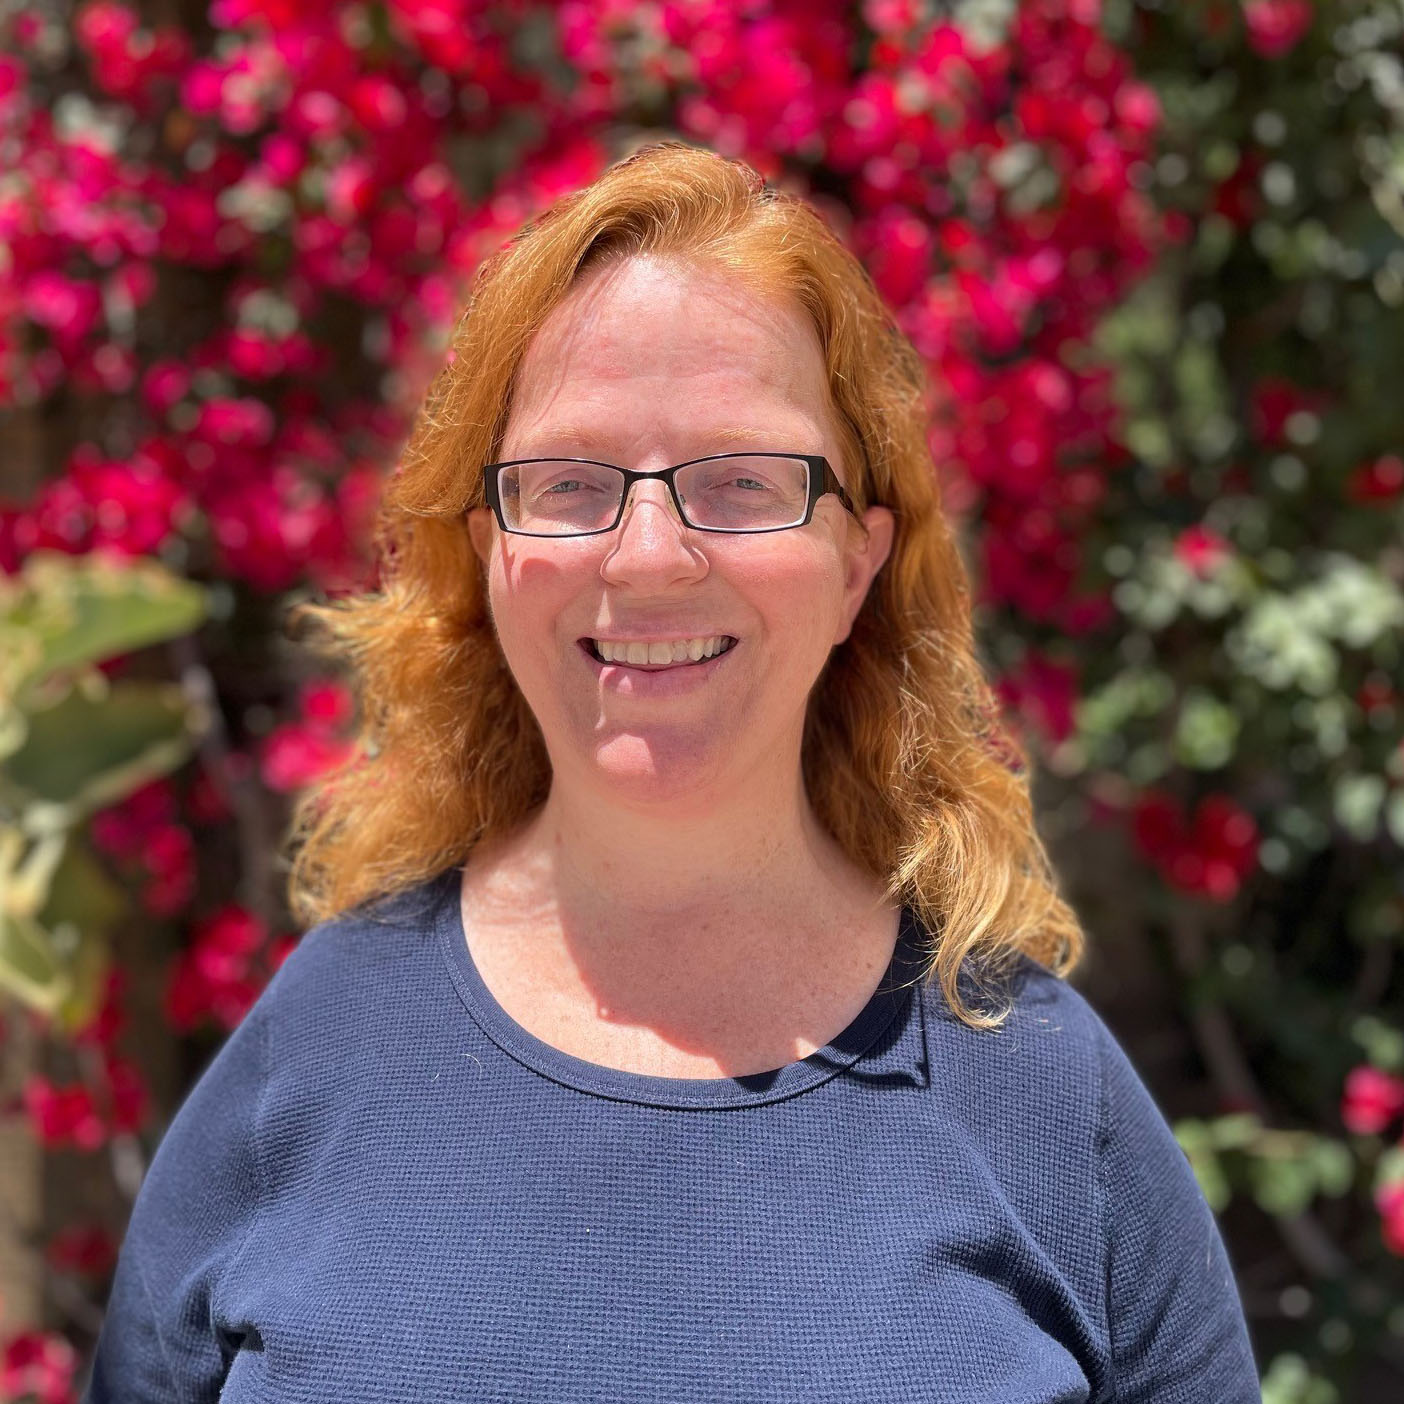 Margaret Reed is standing outside on Miramar campus, with red flowering foliage behind her. She’s wearing a blue shirt and glasses and smiling at the camera.